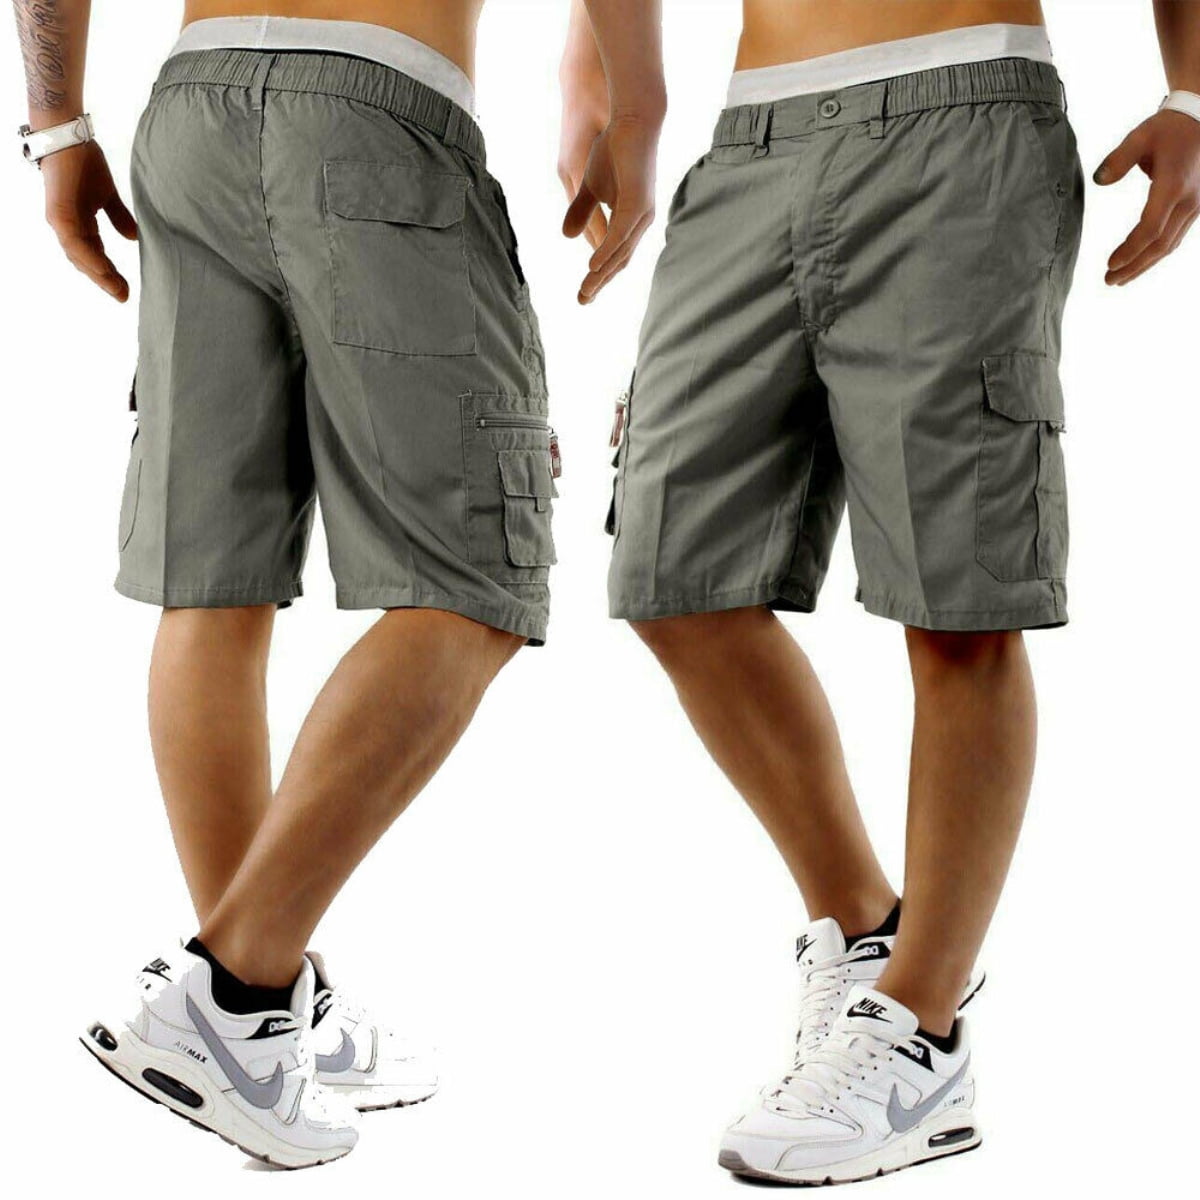 New Mens Summer Shorts Cotton Casual Half Pant Stretch Slim Fit Shorts ...